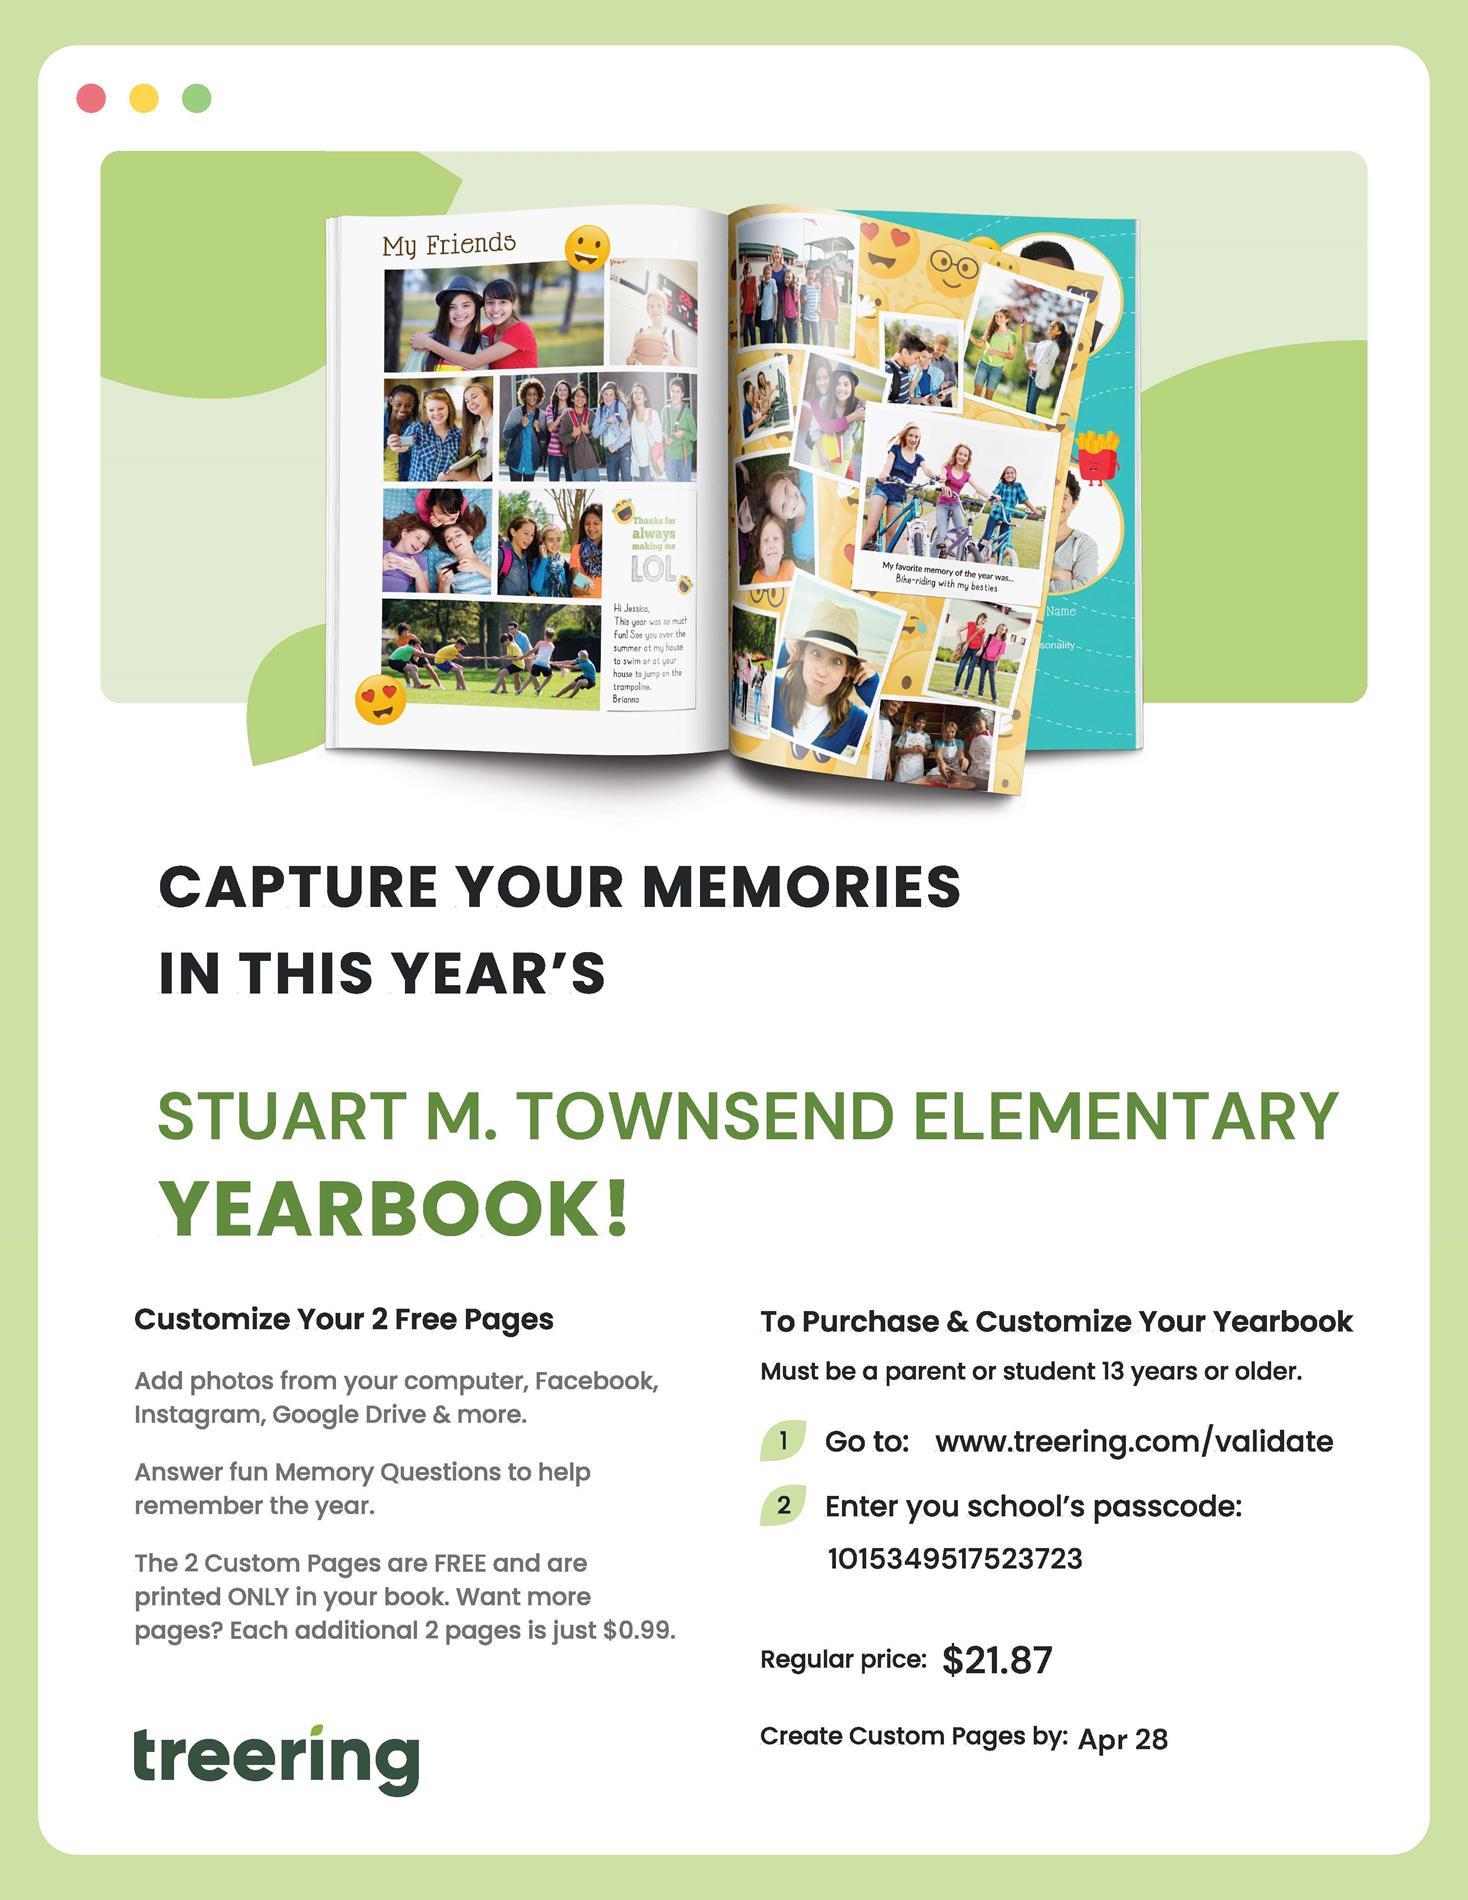 SMTES Yearbook custom pages